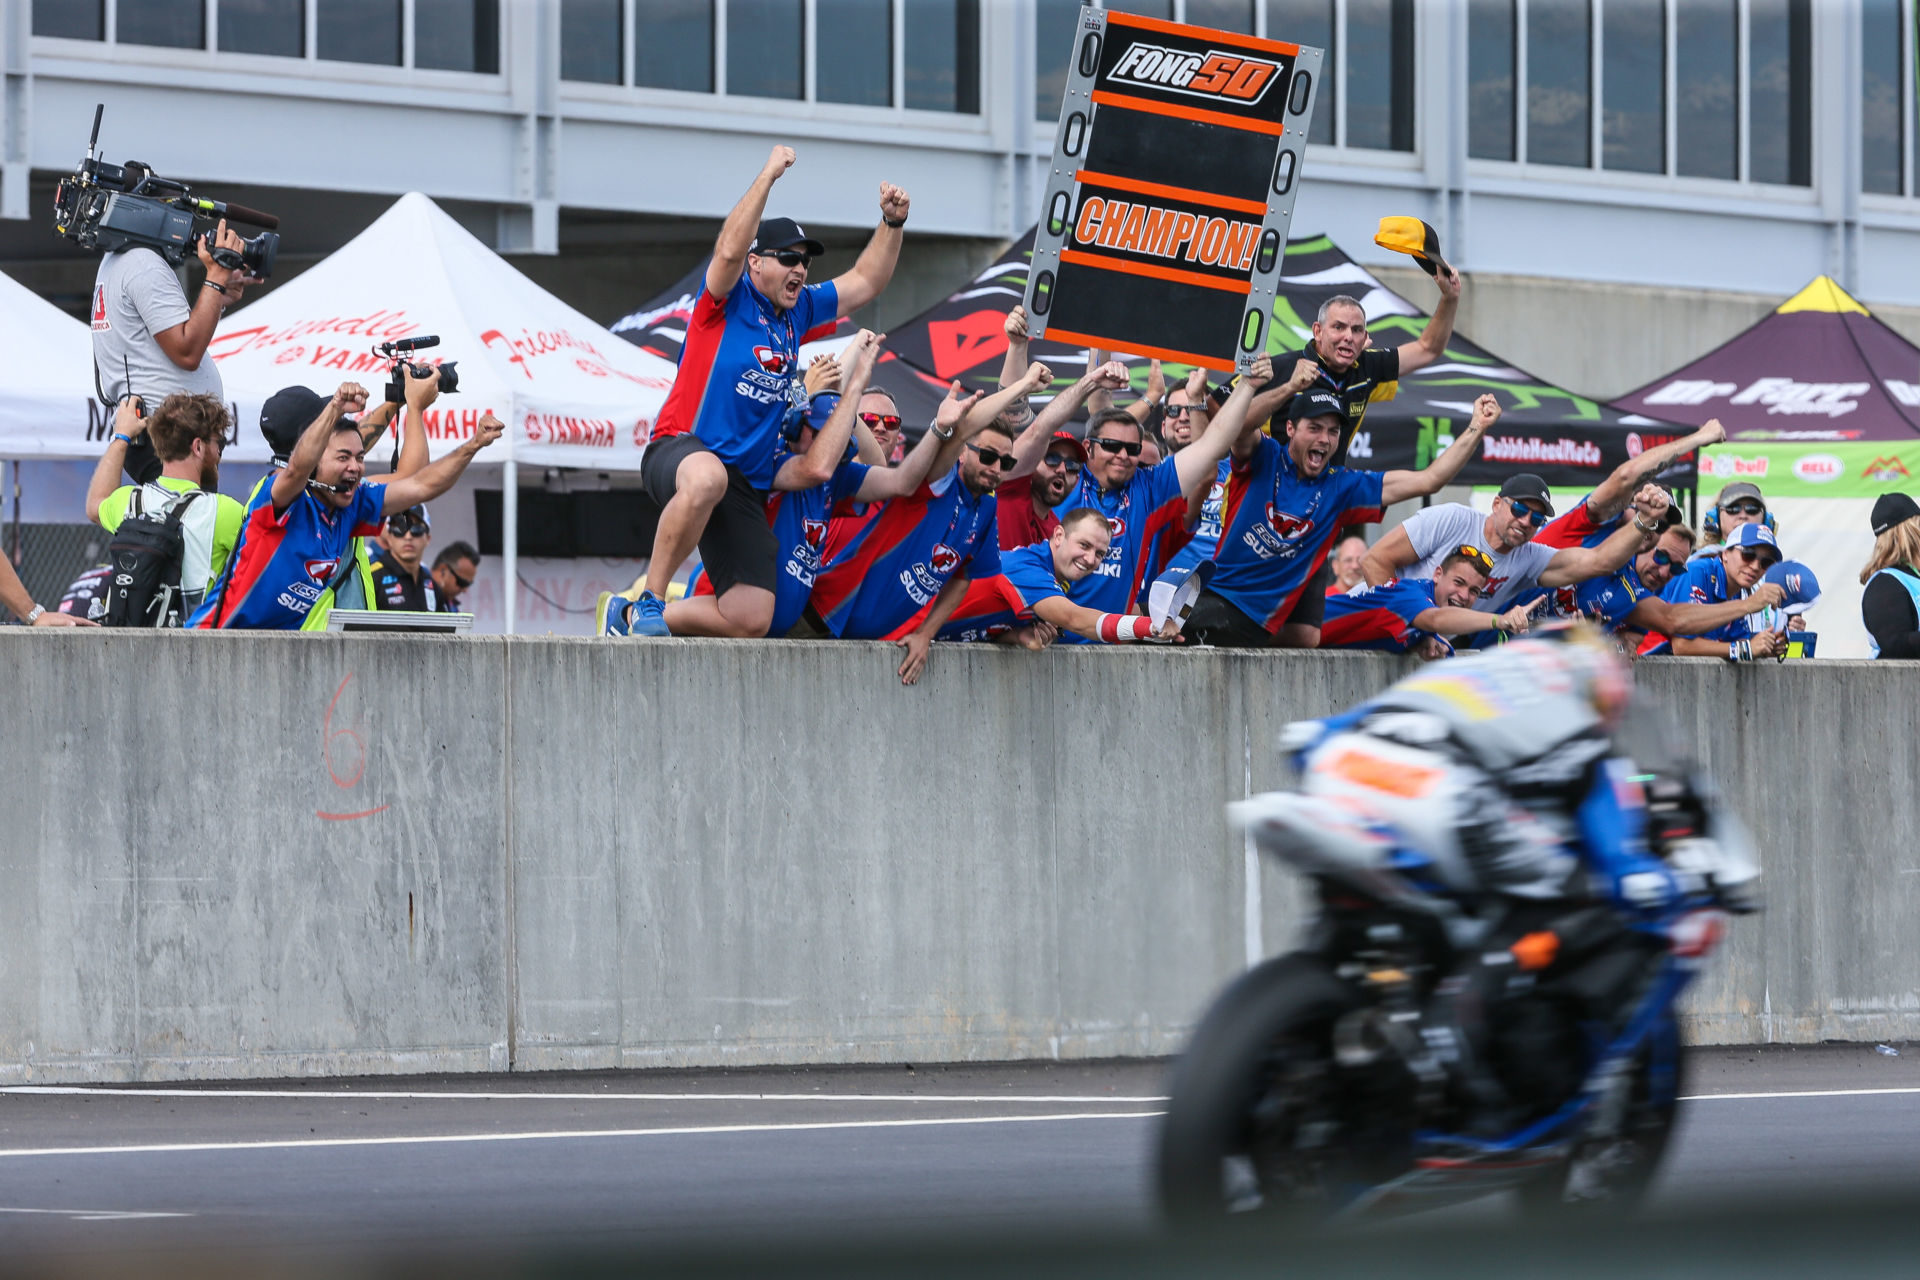 Team Hammer celebrates Bobby Fong winning the 2019 MotoAmerica Supersport Championship at Barber Motorsports Park. Photo by Brian J. Nelson.